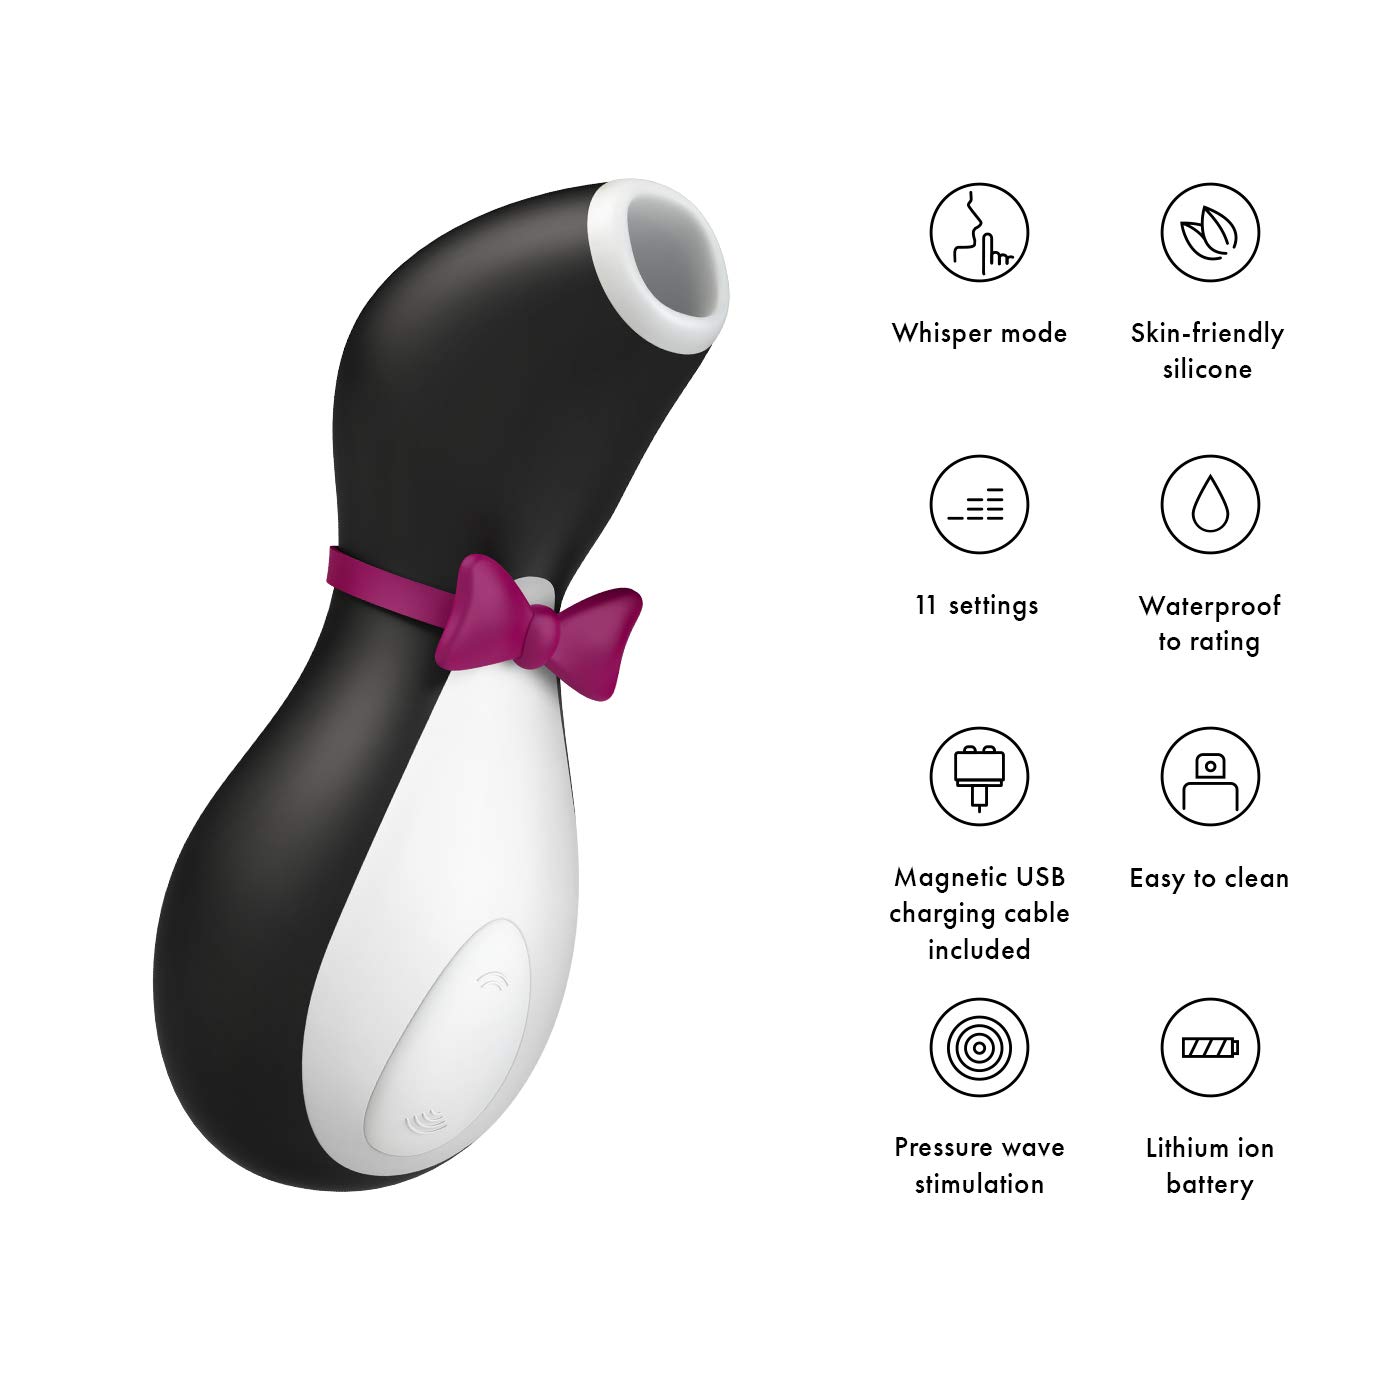 Satisfyer Pro Penguin Clitoral Massager features